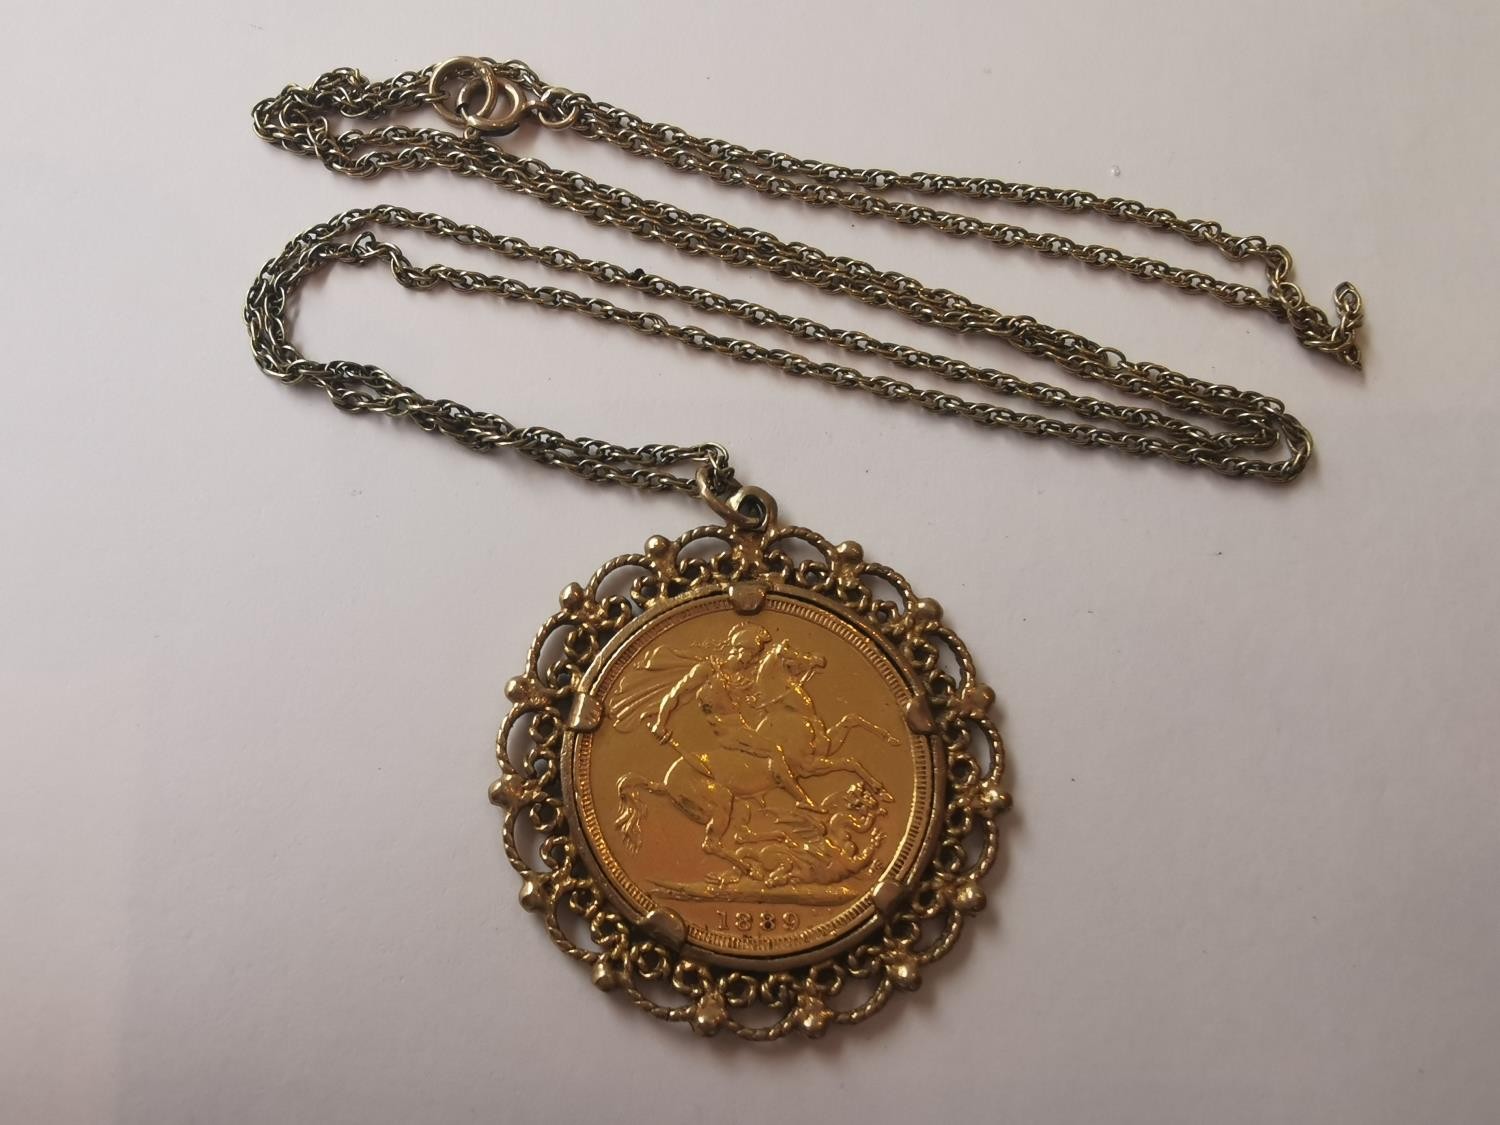 An 1889 Victorian full sovereign in filigree wirework mount on a 9 carat yellow gold rope chain. (